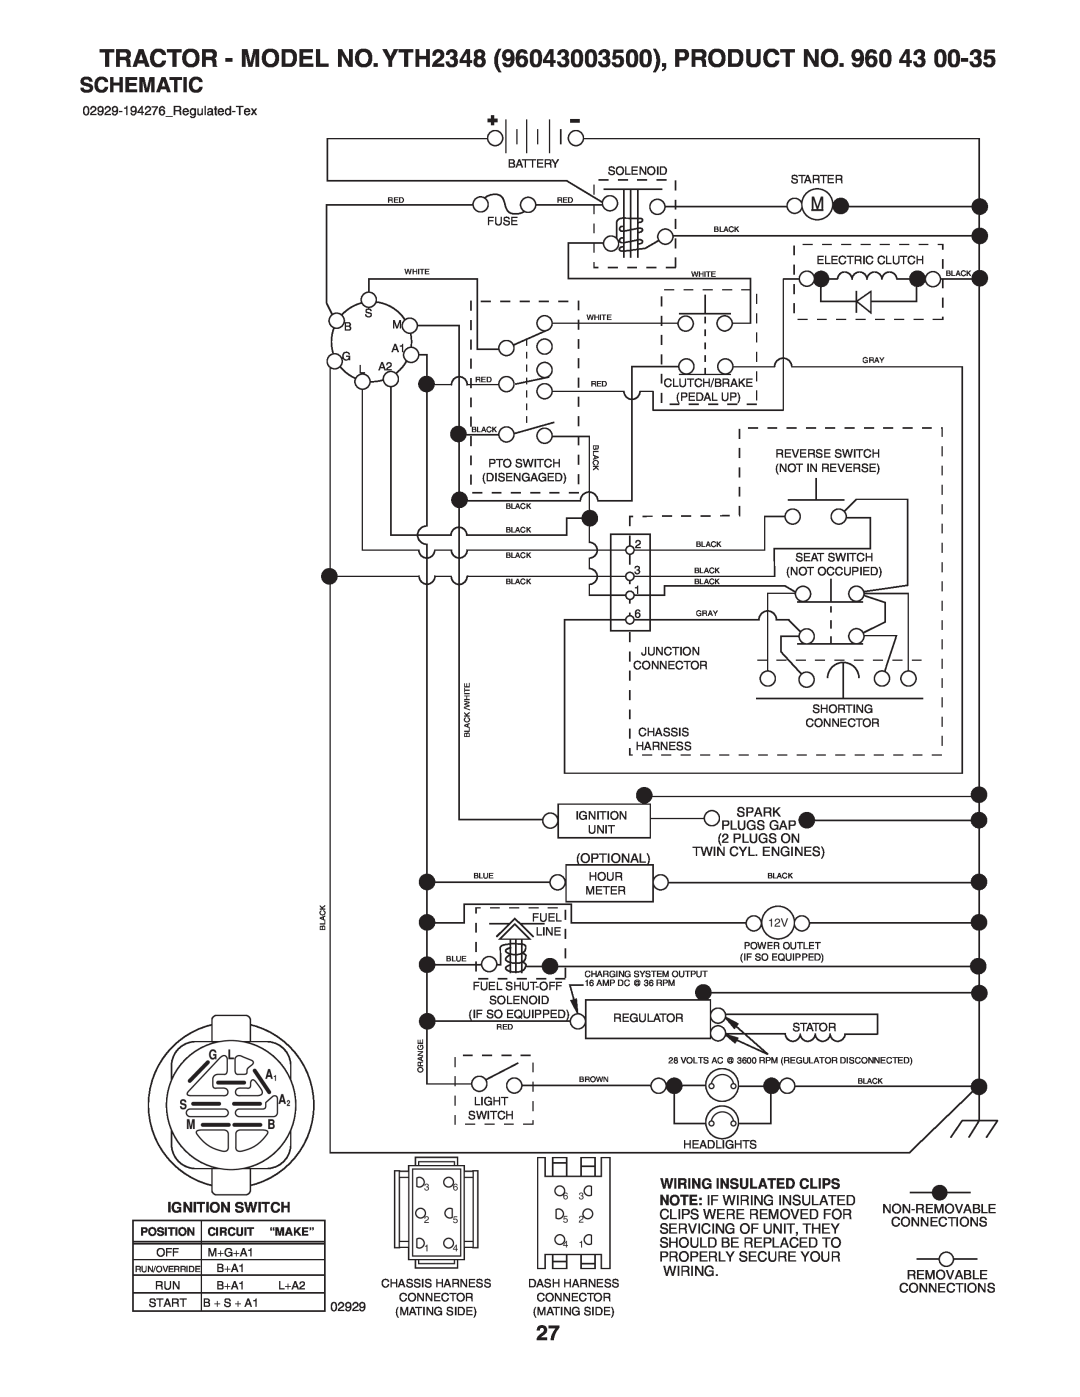 Husqvarna YTH2348 owner manual Schematic, 02929-194276_Regulated-Tex, Optional, Connections, Removable 